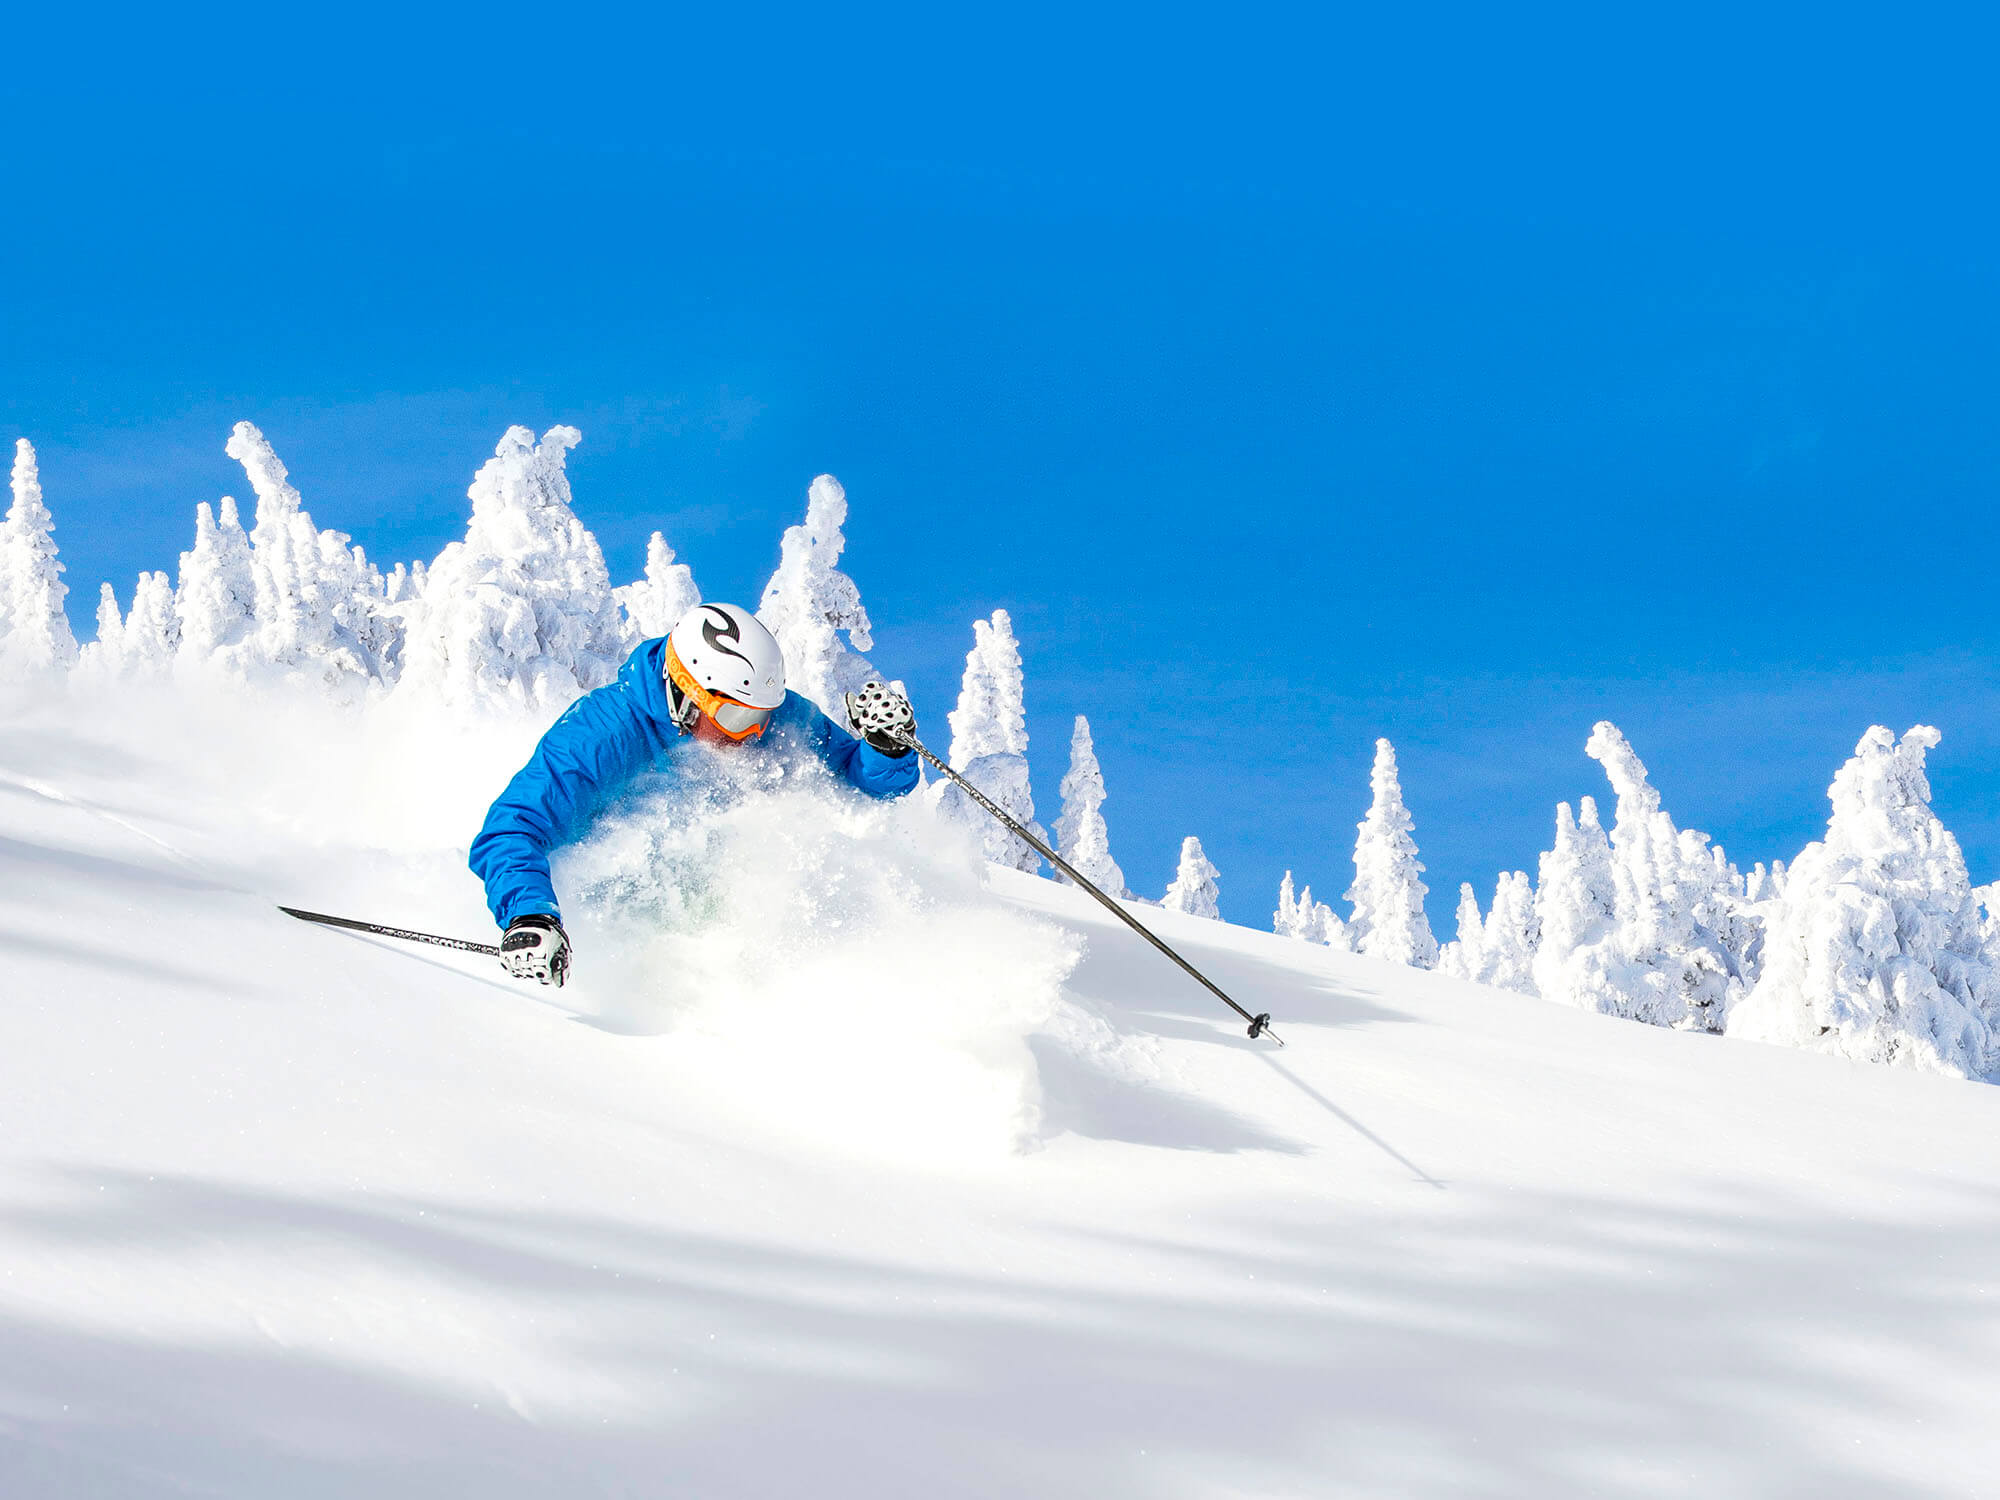 A skier in a blue jacket skis down a snowy slope with snow covered trees and blue skies in the background at Big White Ski Resort.